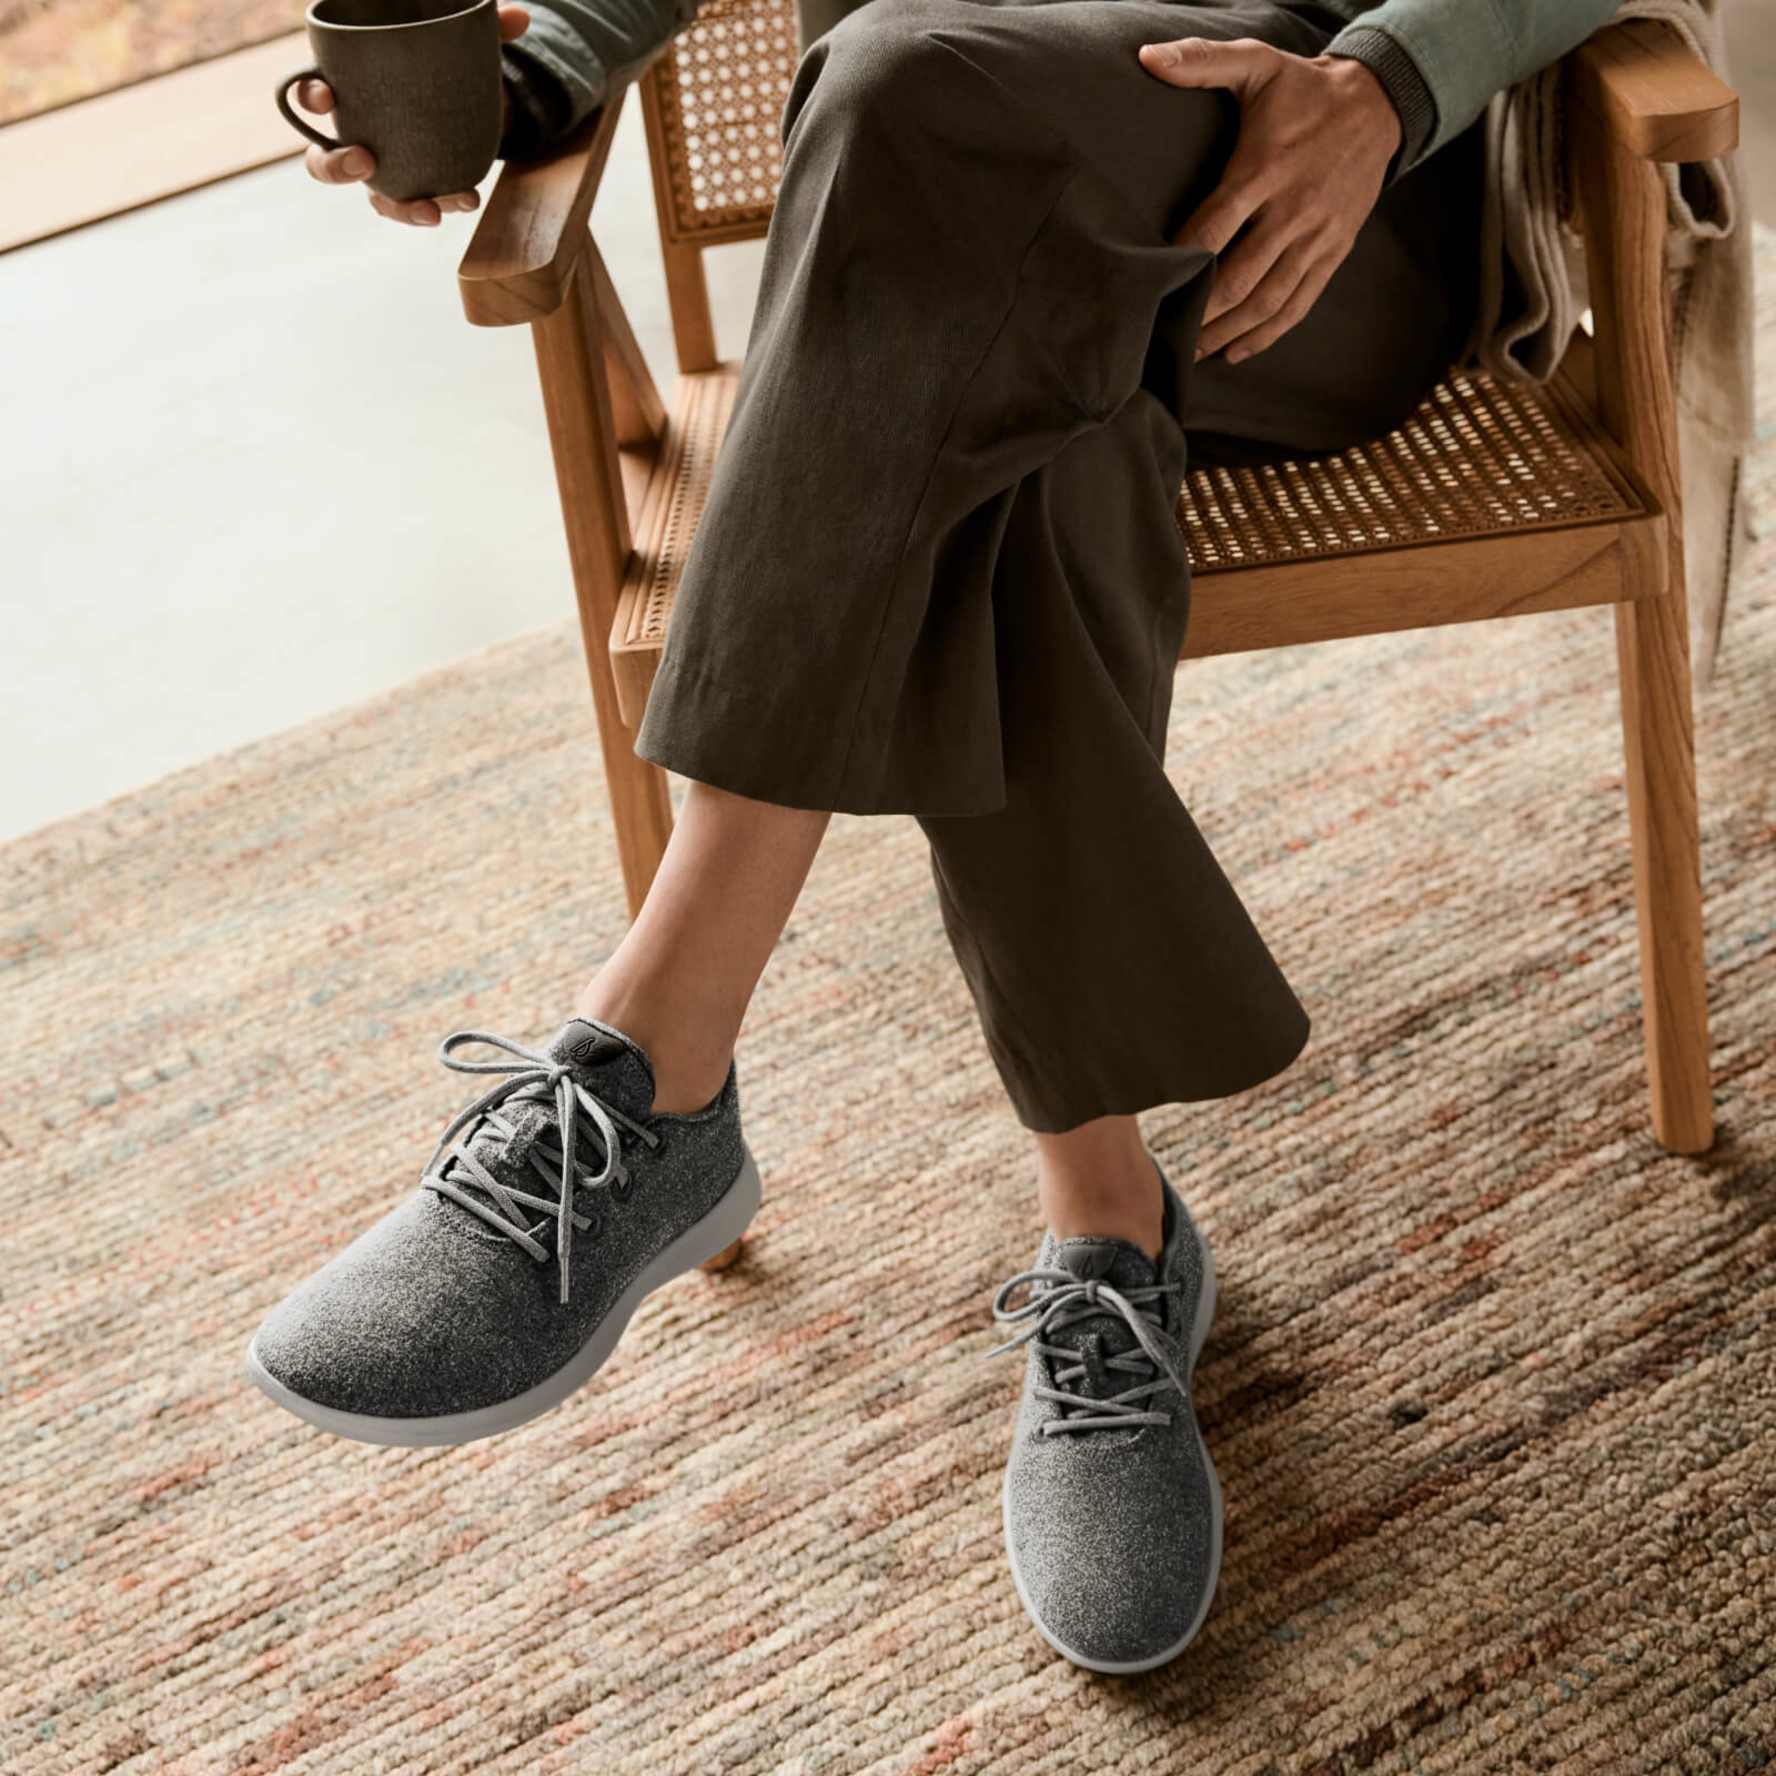 17 Essential Shoes for Men in 2023: Sneakers, Loafers, Boots, Dress Shoes,  and More | GQ